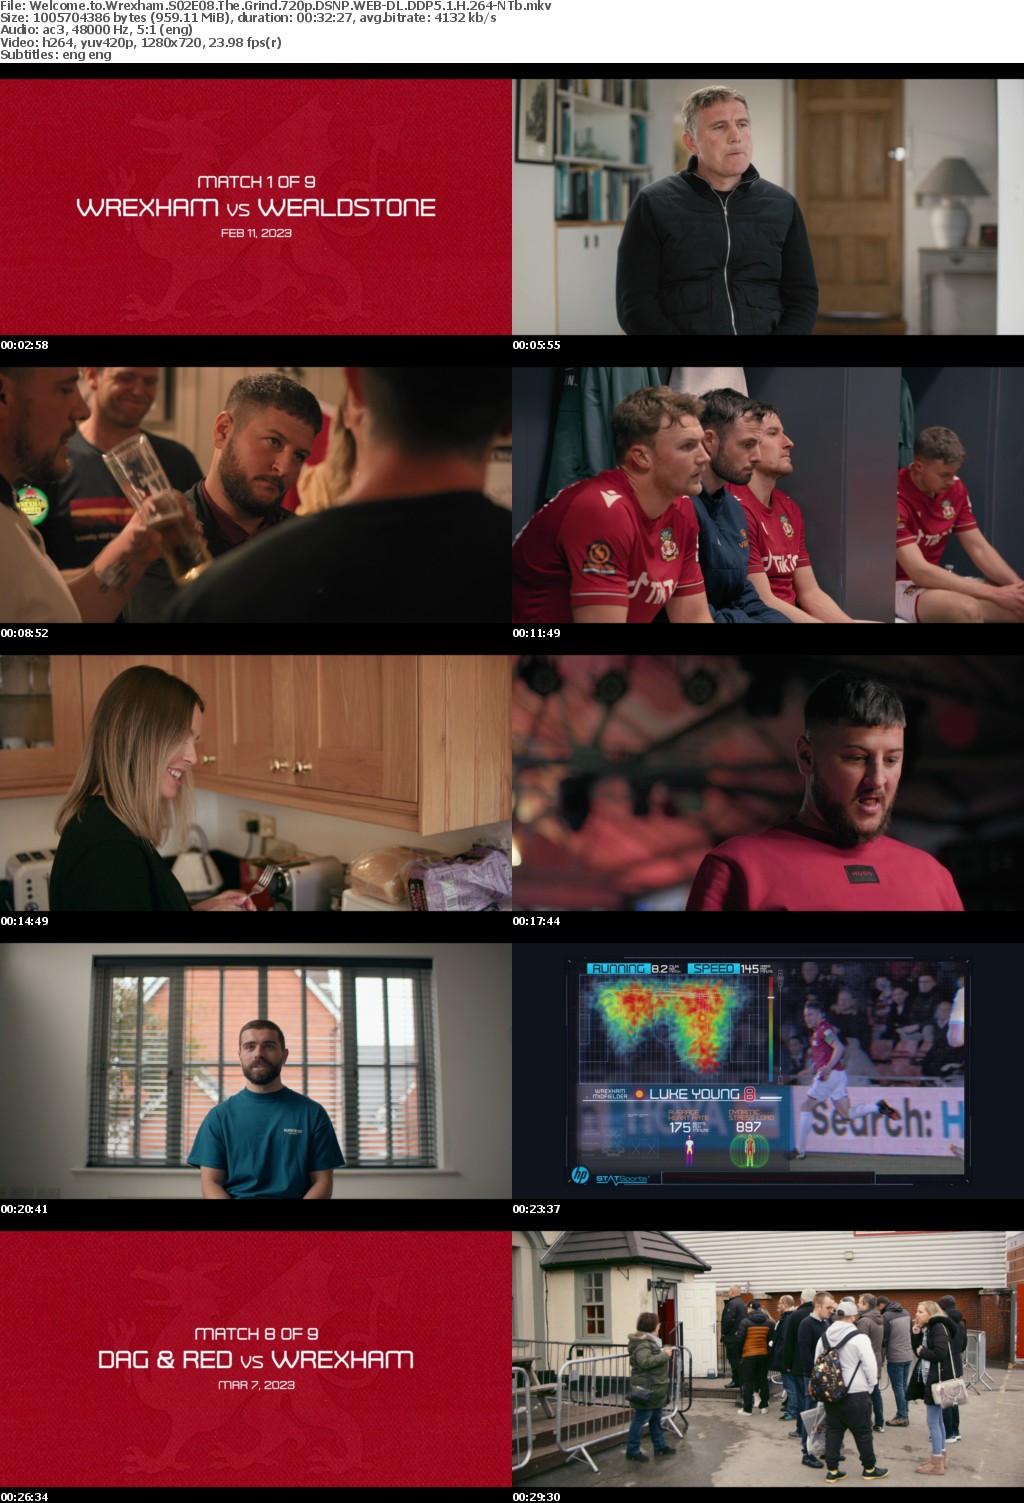 Welcome to Wrexham S02E08 The Grind 720p DSNP WEB-DL DDP5 1 H 264-NTb